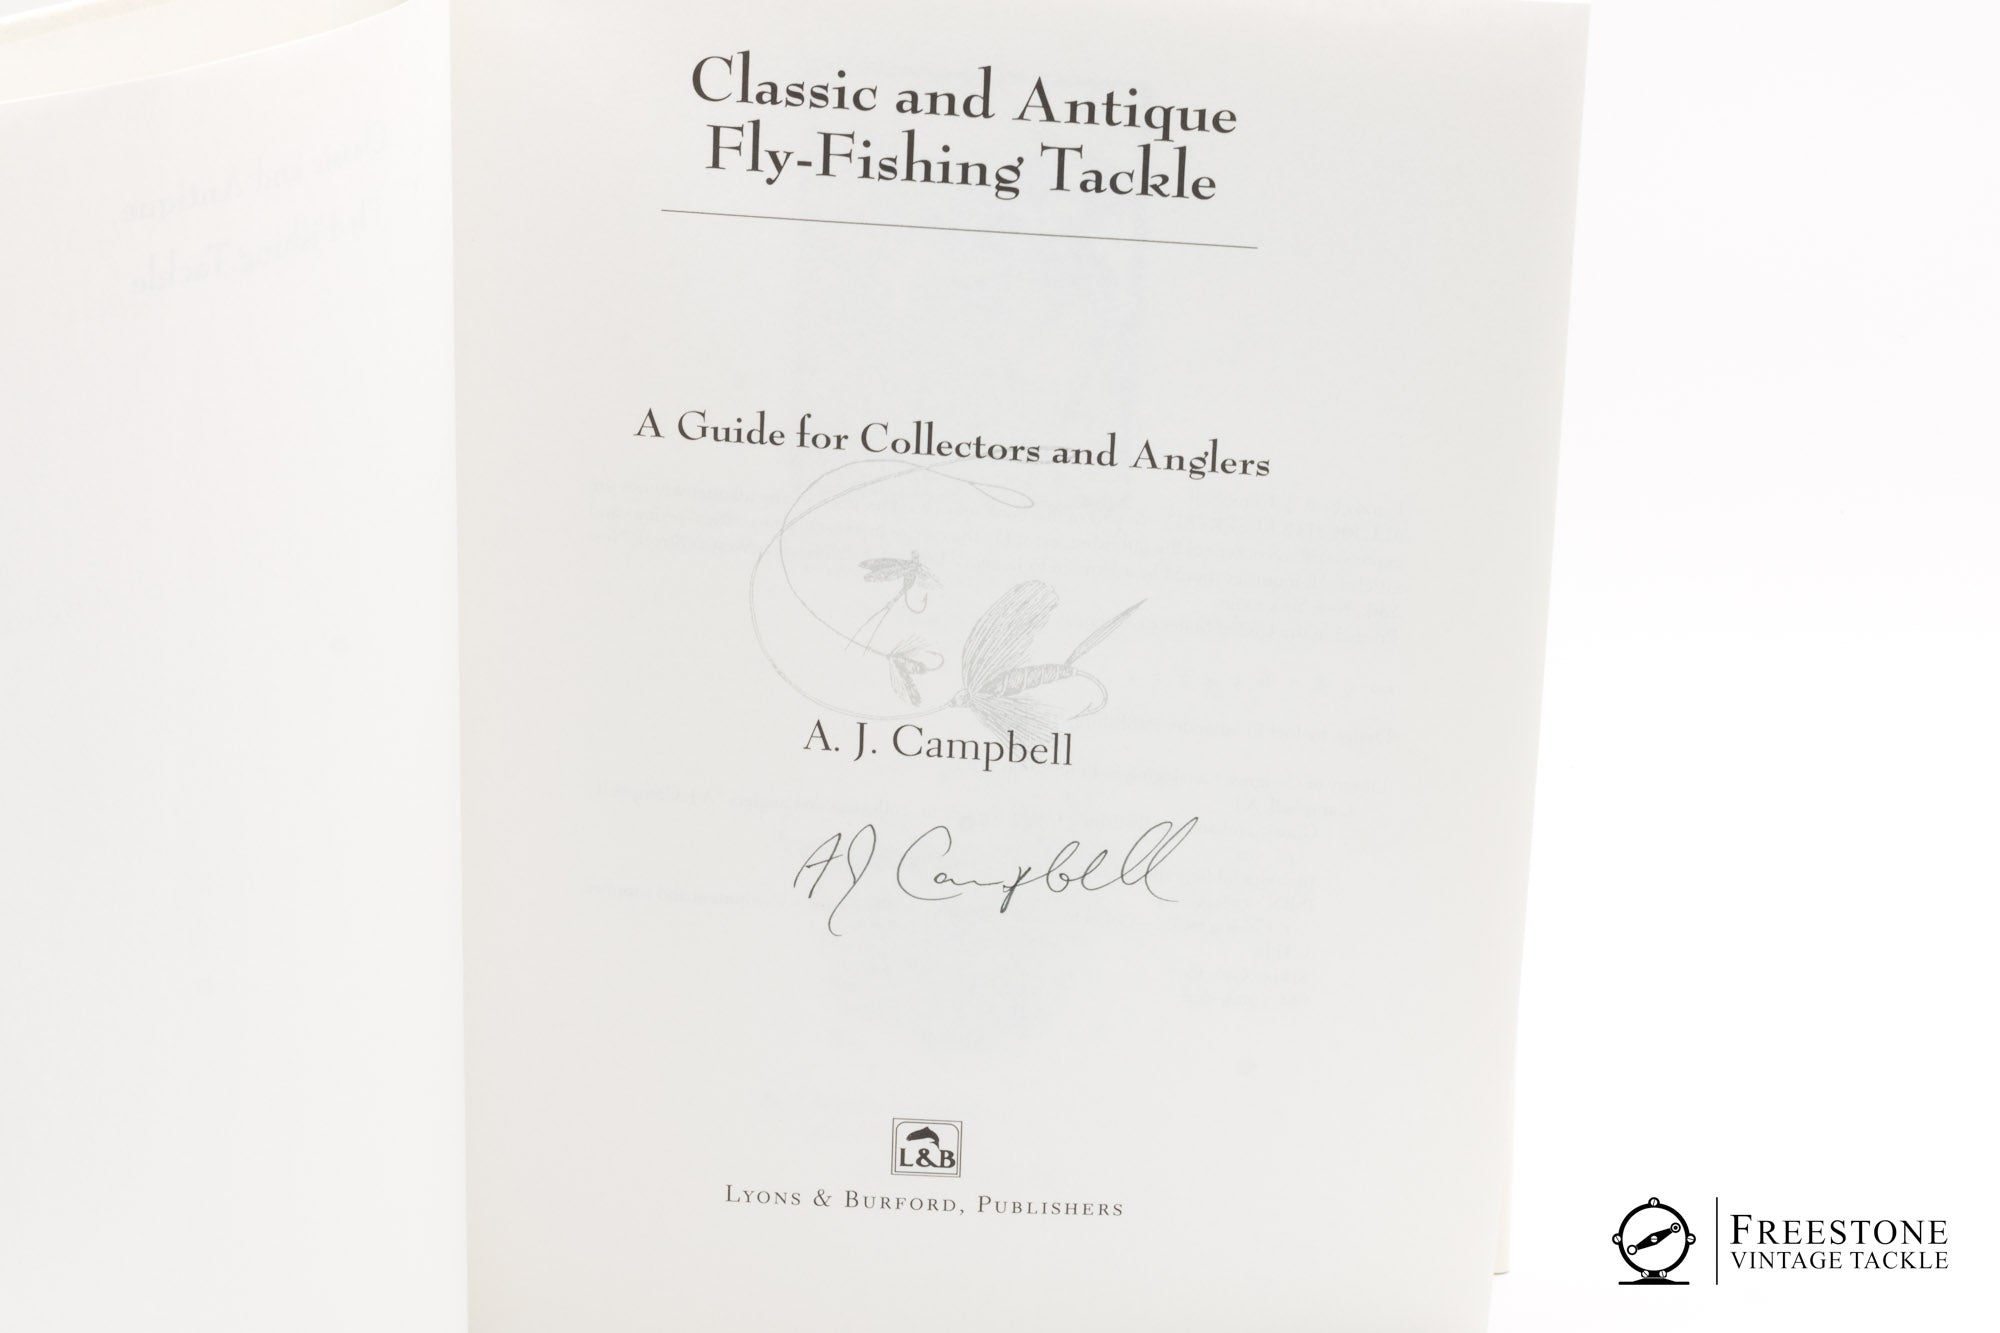 Classic and Antique Fly-fishing Tackle: A Guide for Collectors and Anglers [Book]